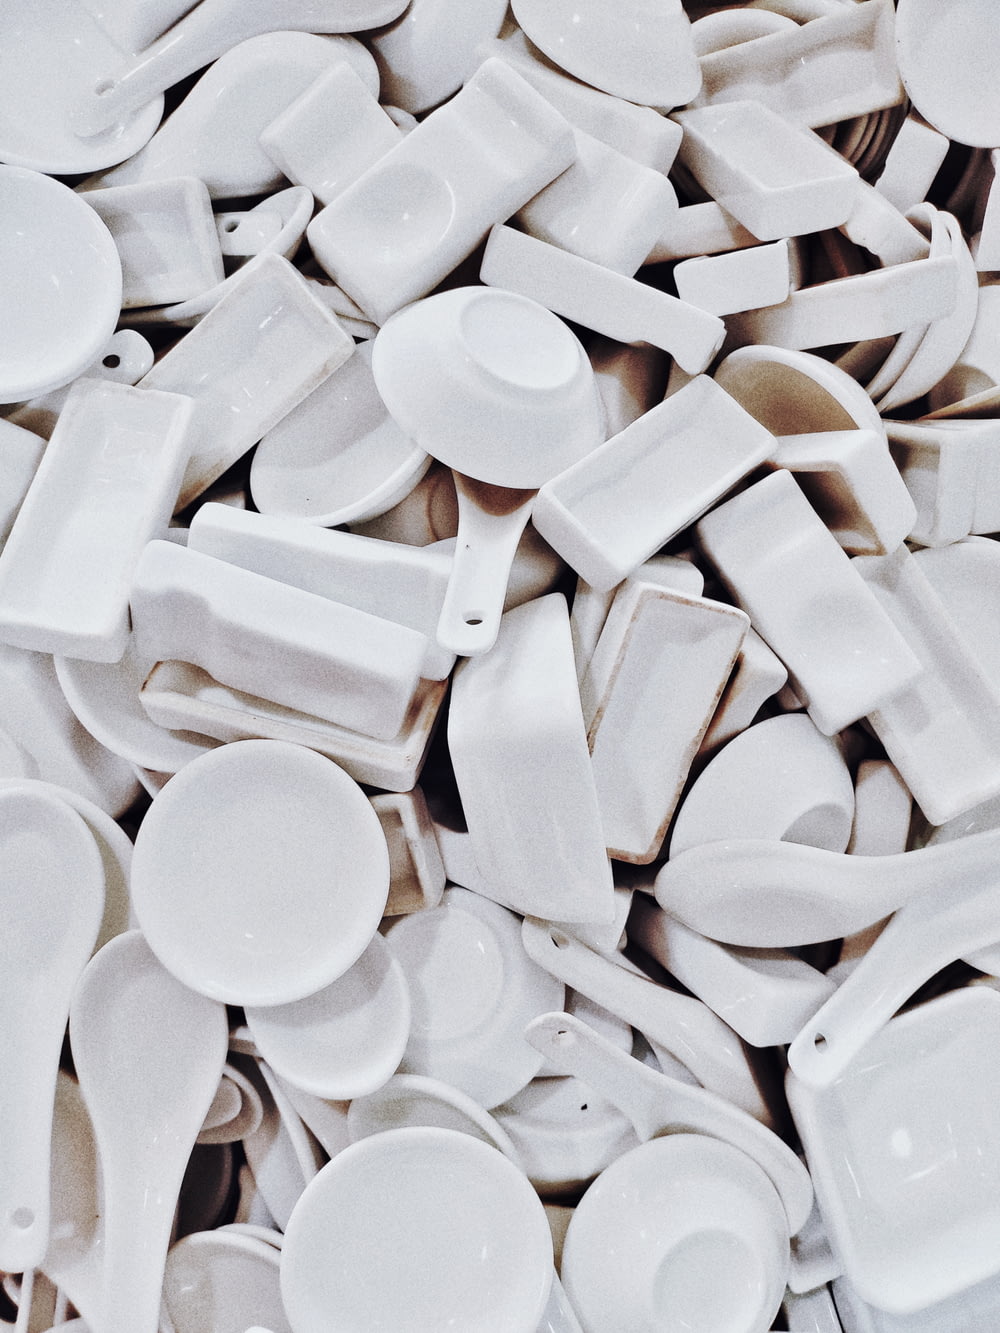 white ceramic bowls and spoons